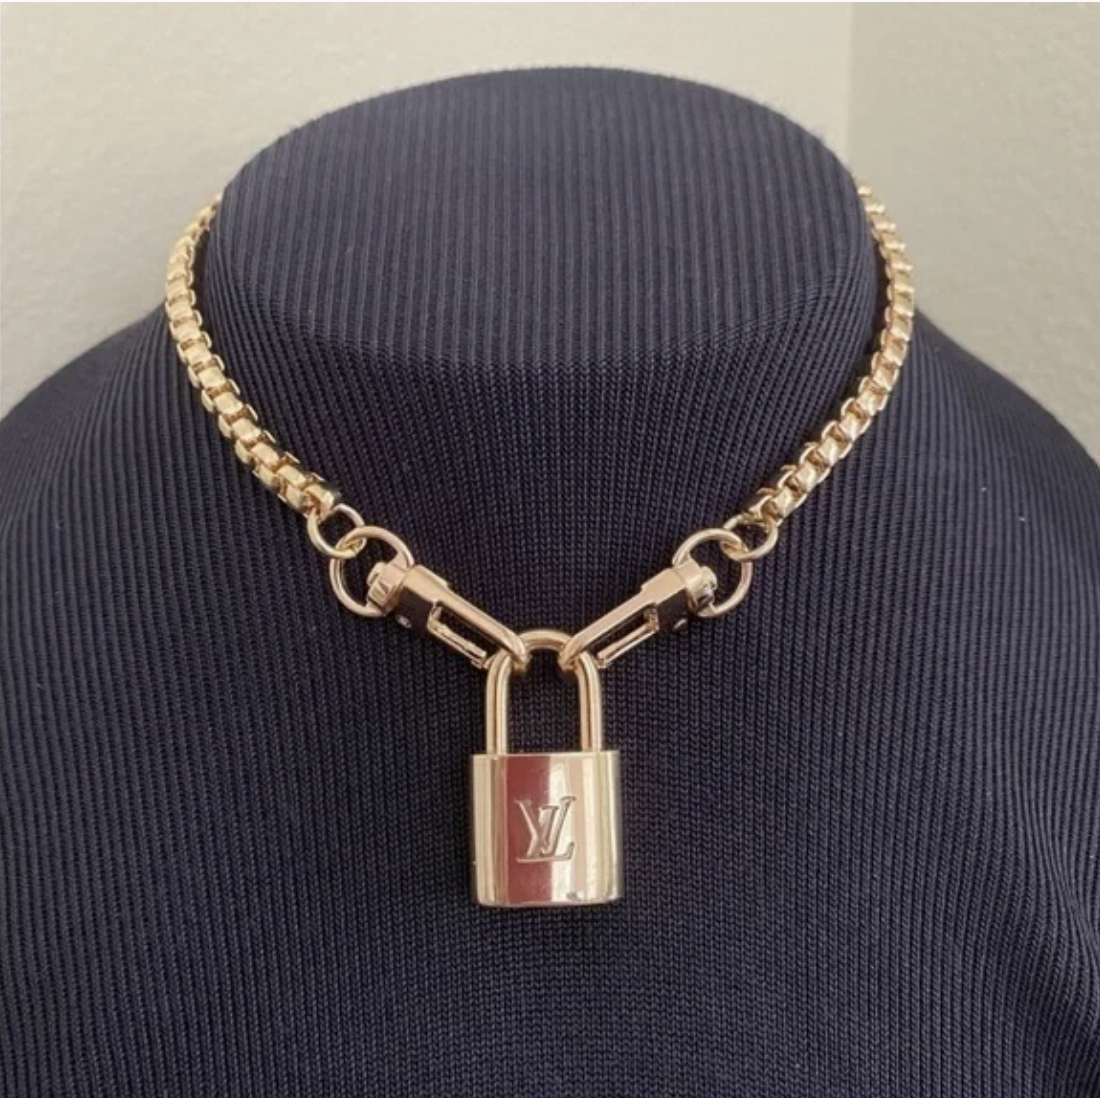 New Louis Vuitton Gold-Tone Lock with 16 Box Link Chain Choker Necklace